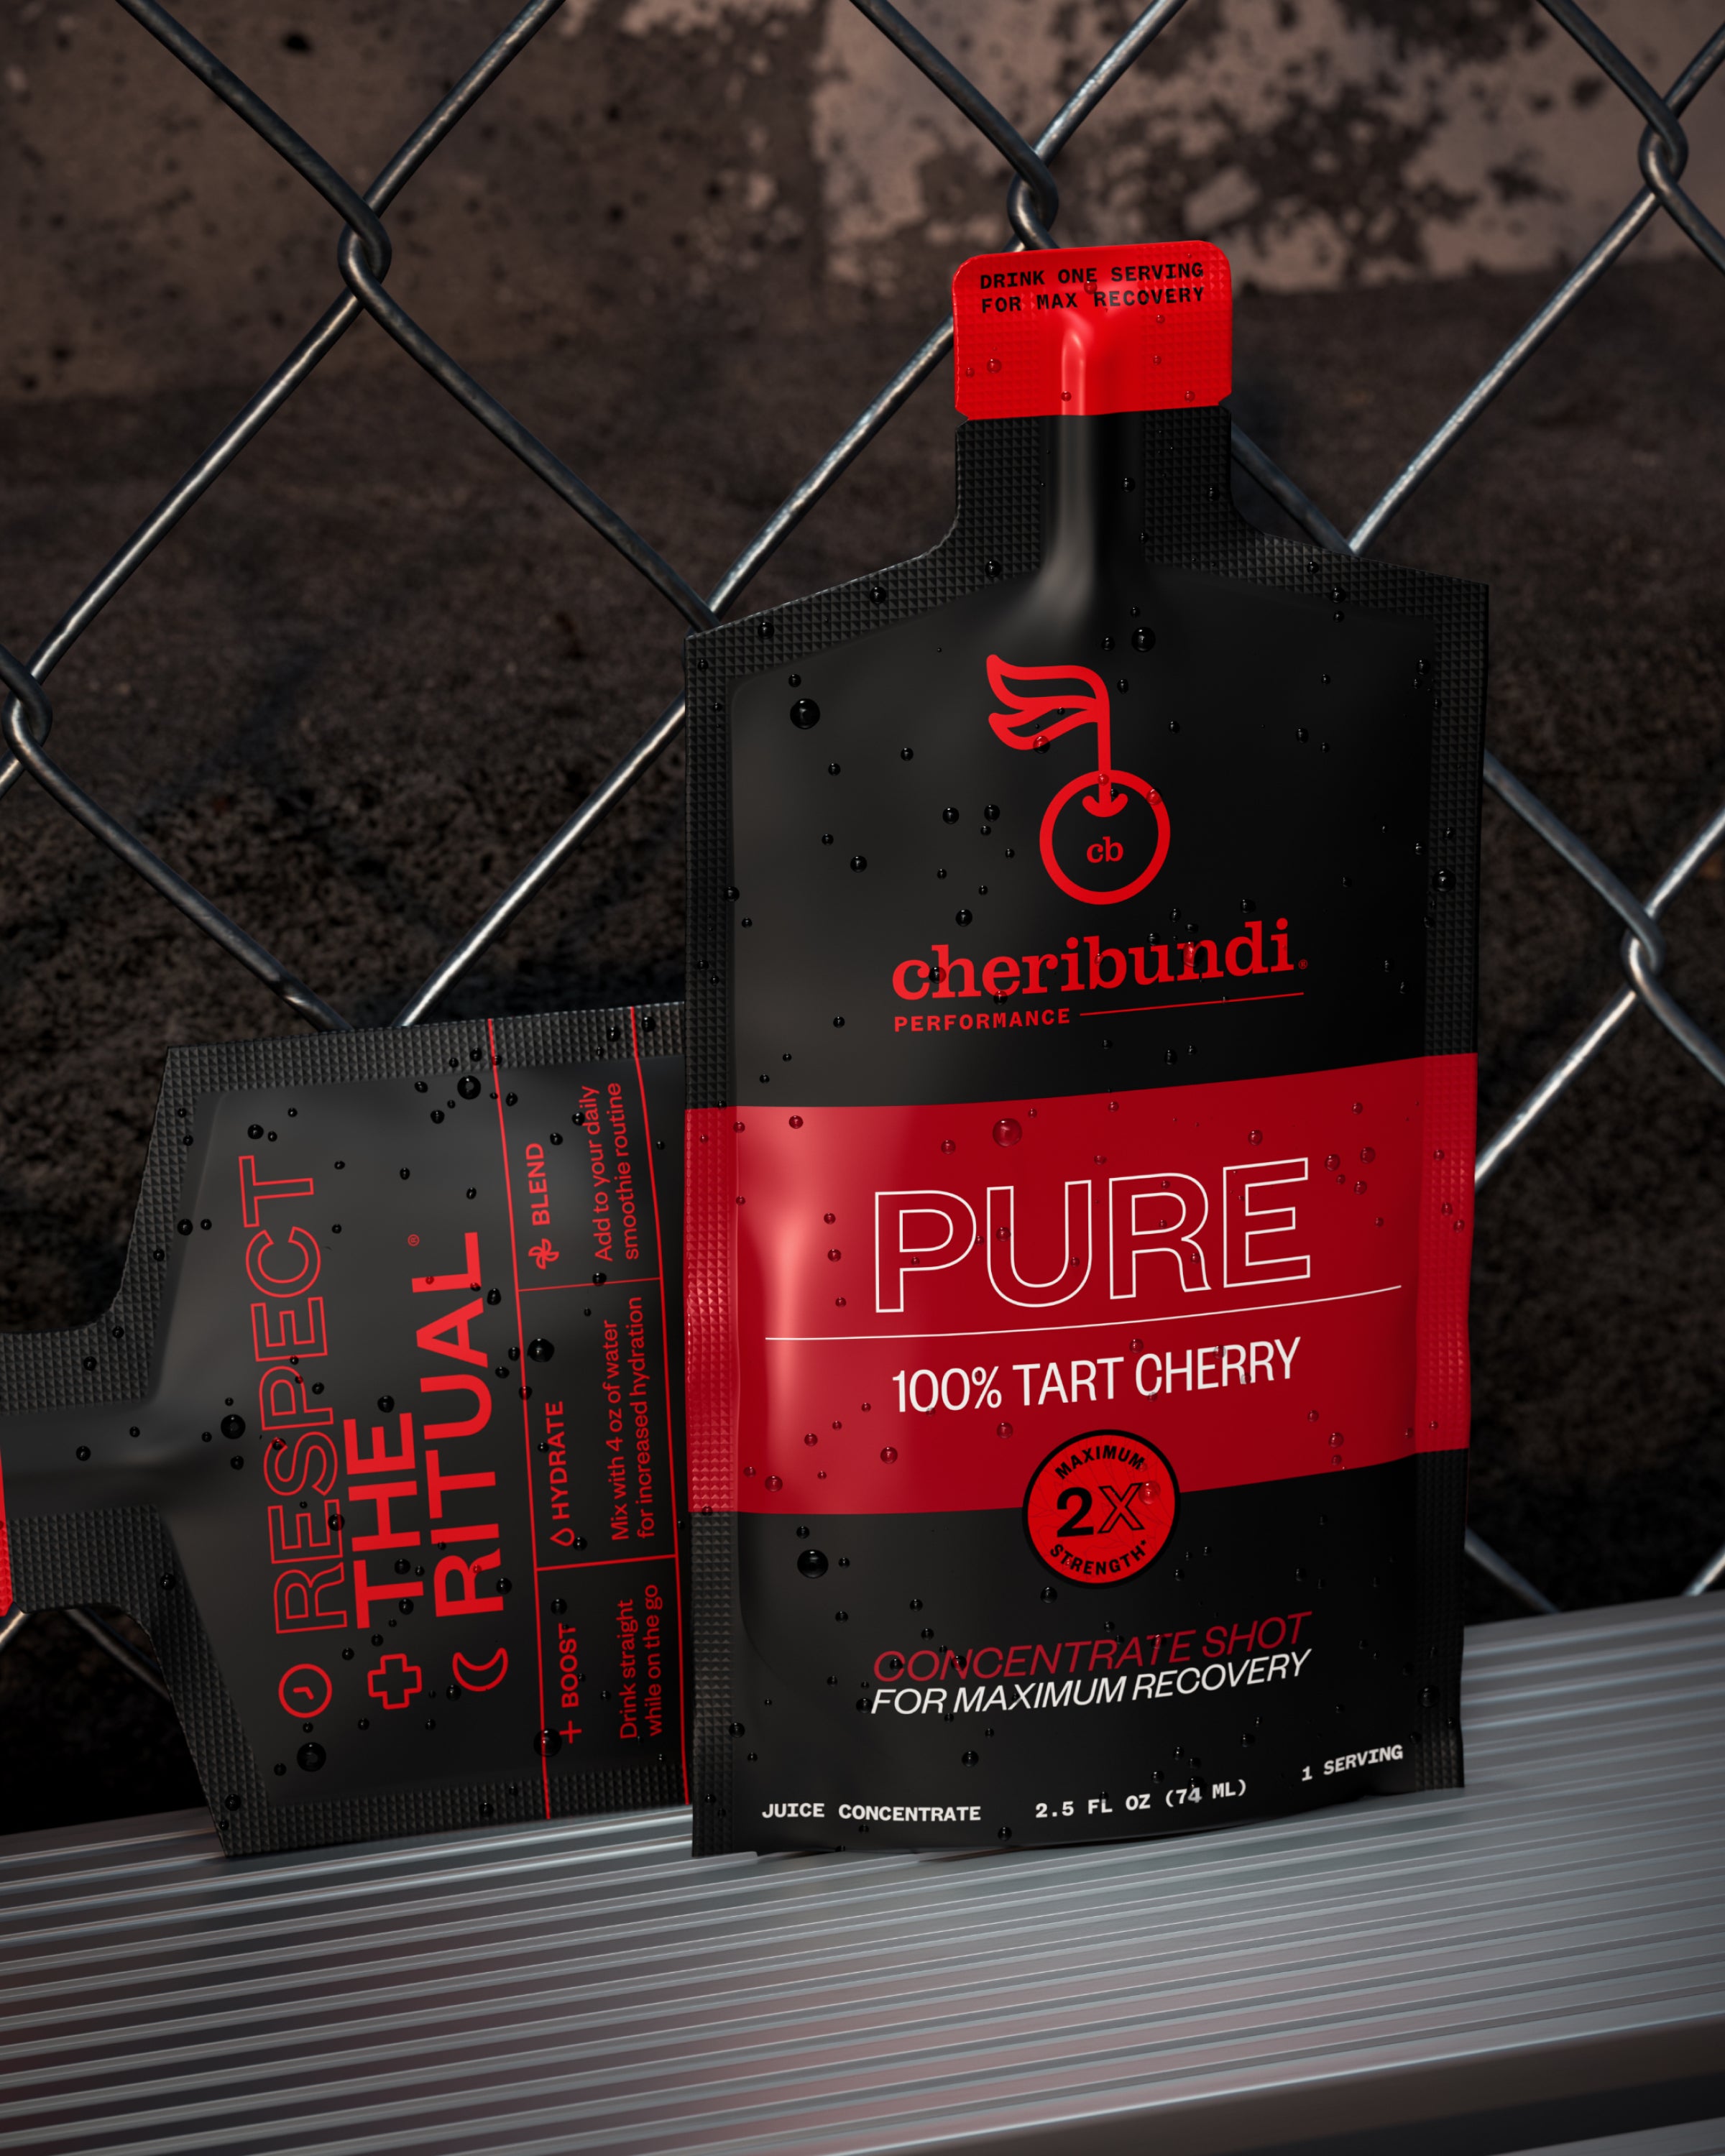 Pure Concentrate product packaging. Tart cherry juice concentrate. Cherry concentrate for gout. Cherry extract.